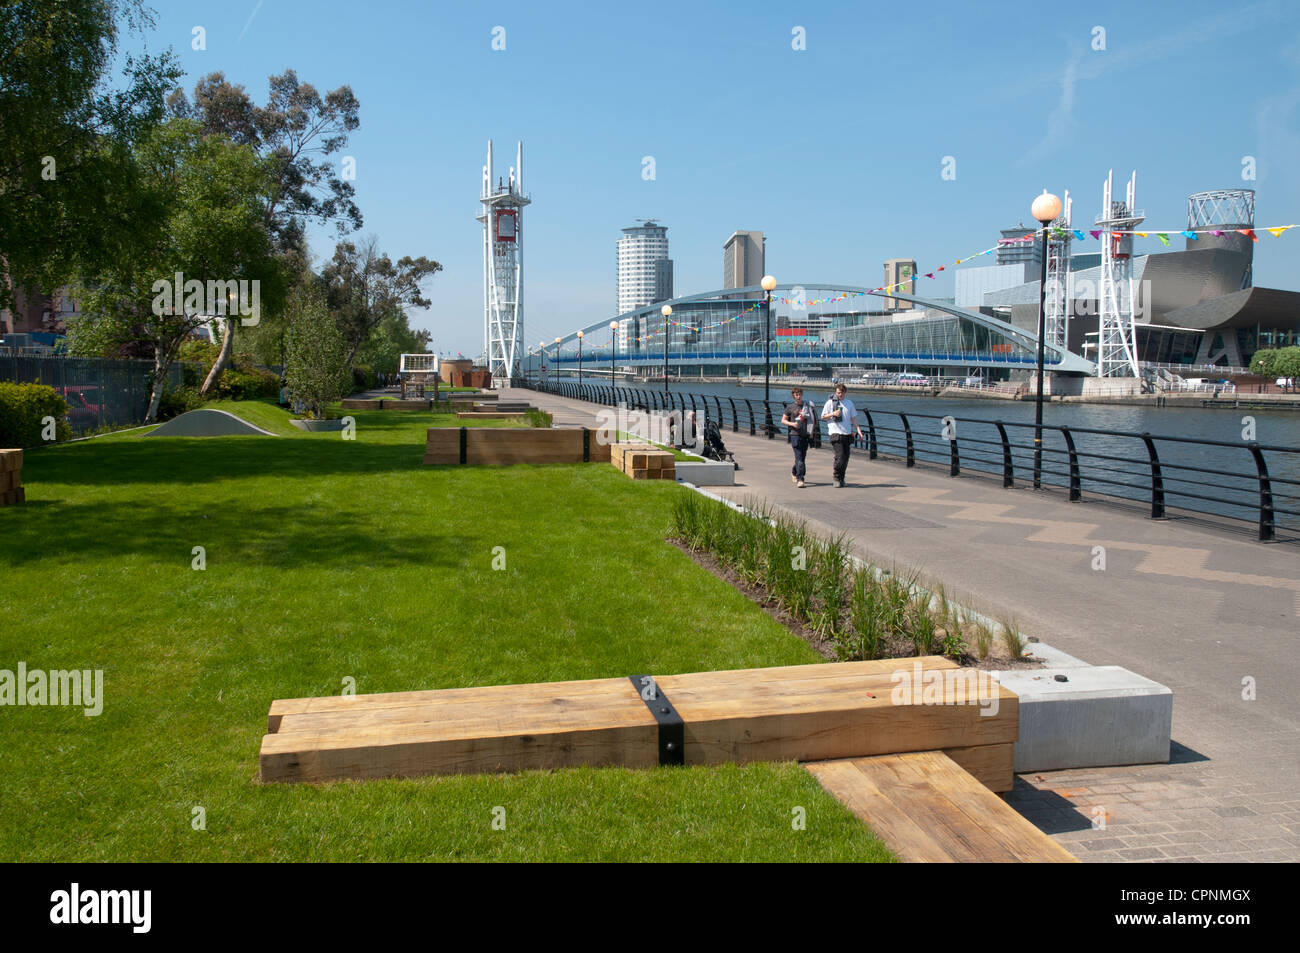 New (May 2012) landscaping works on Trafford Wharf, Salford Quays, Manchester, England, UK Stock Photo